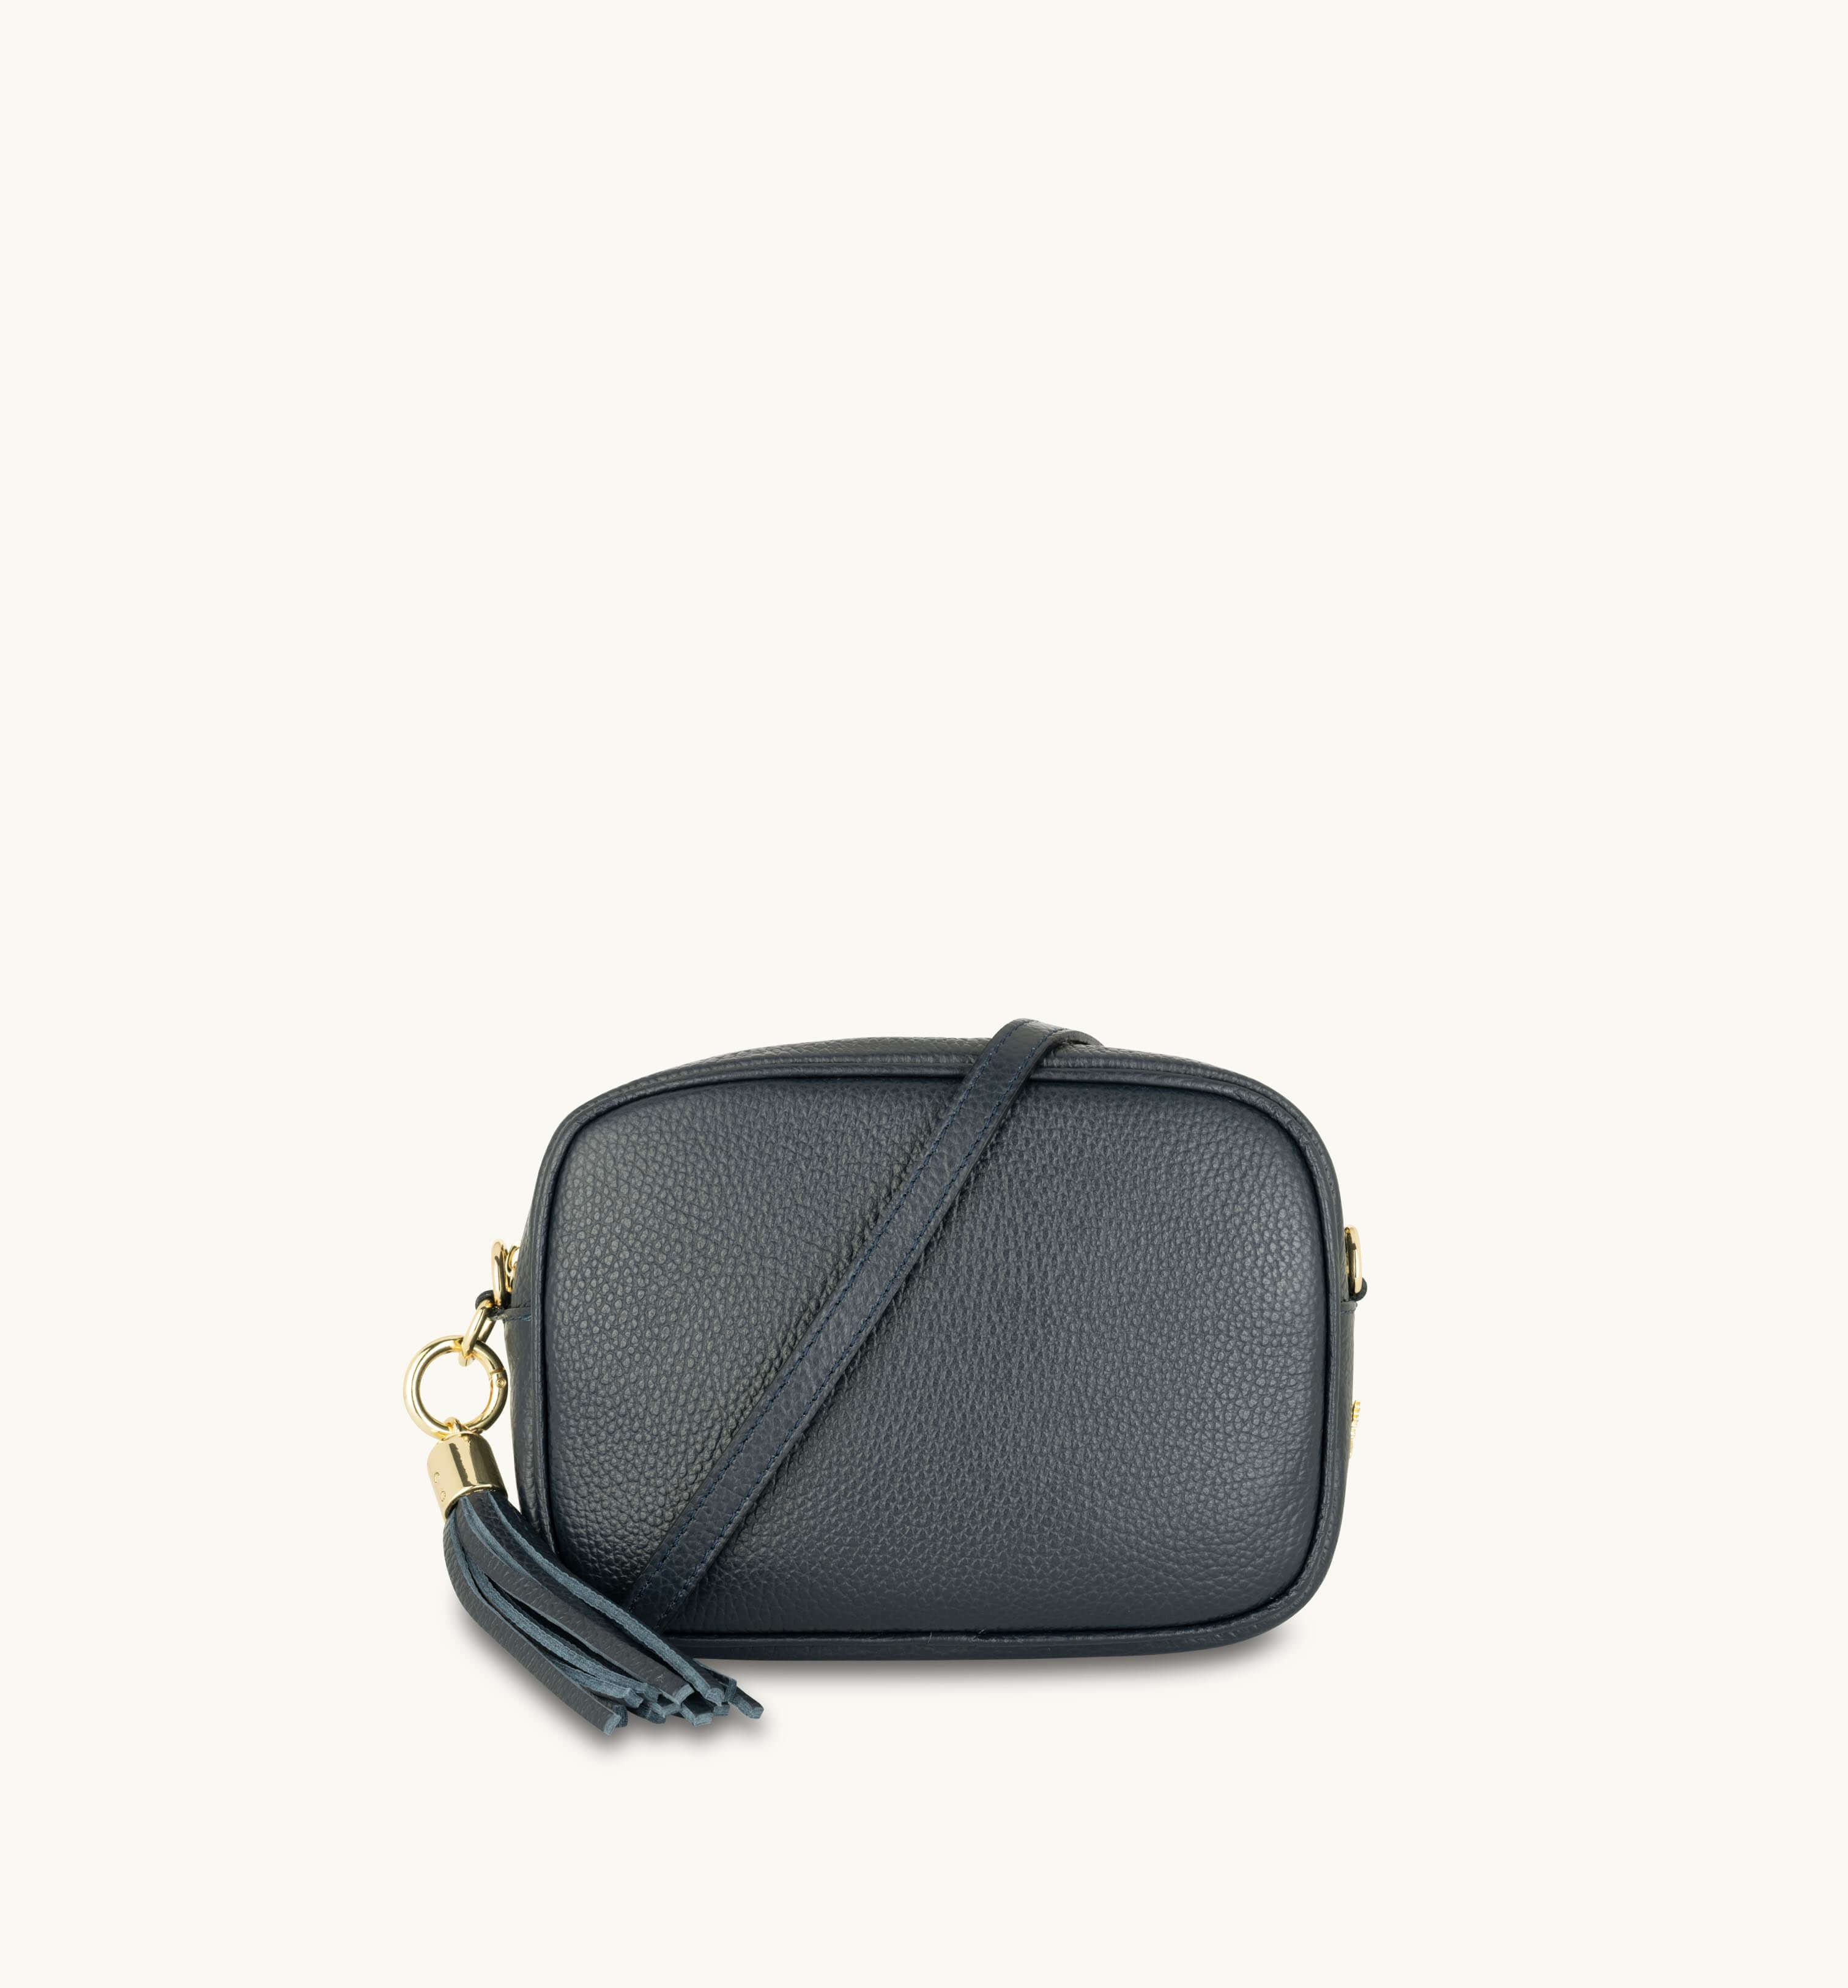 The Tassel Navy Leather Crossbody Bag With Navy & Gold Stripe Strap